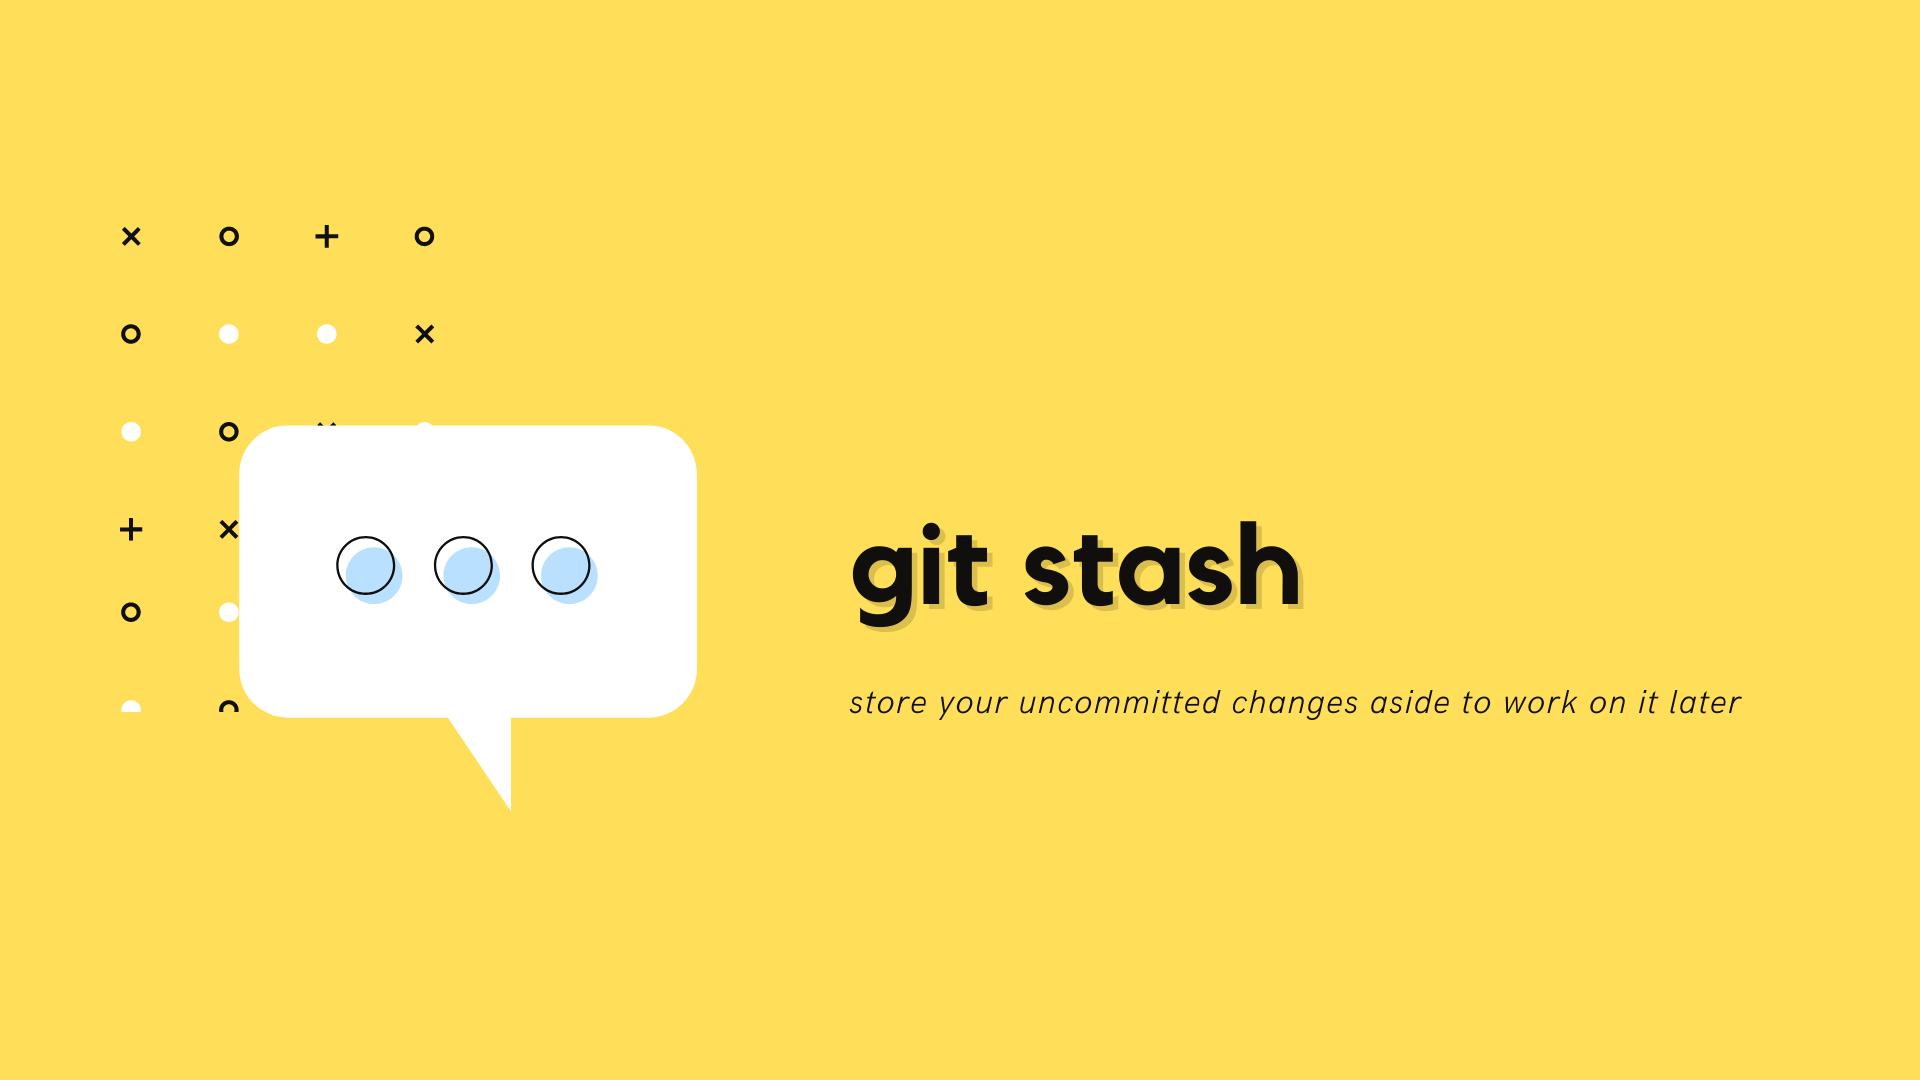 Git stash - Store your uncommitted changes aside to work on it later